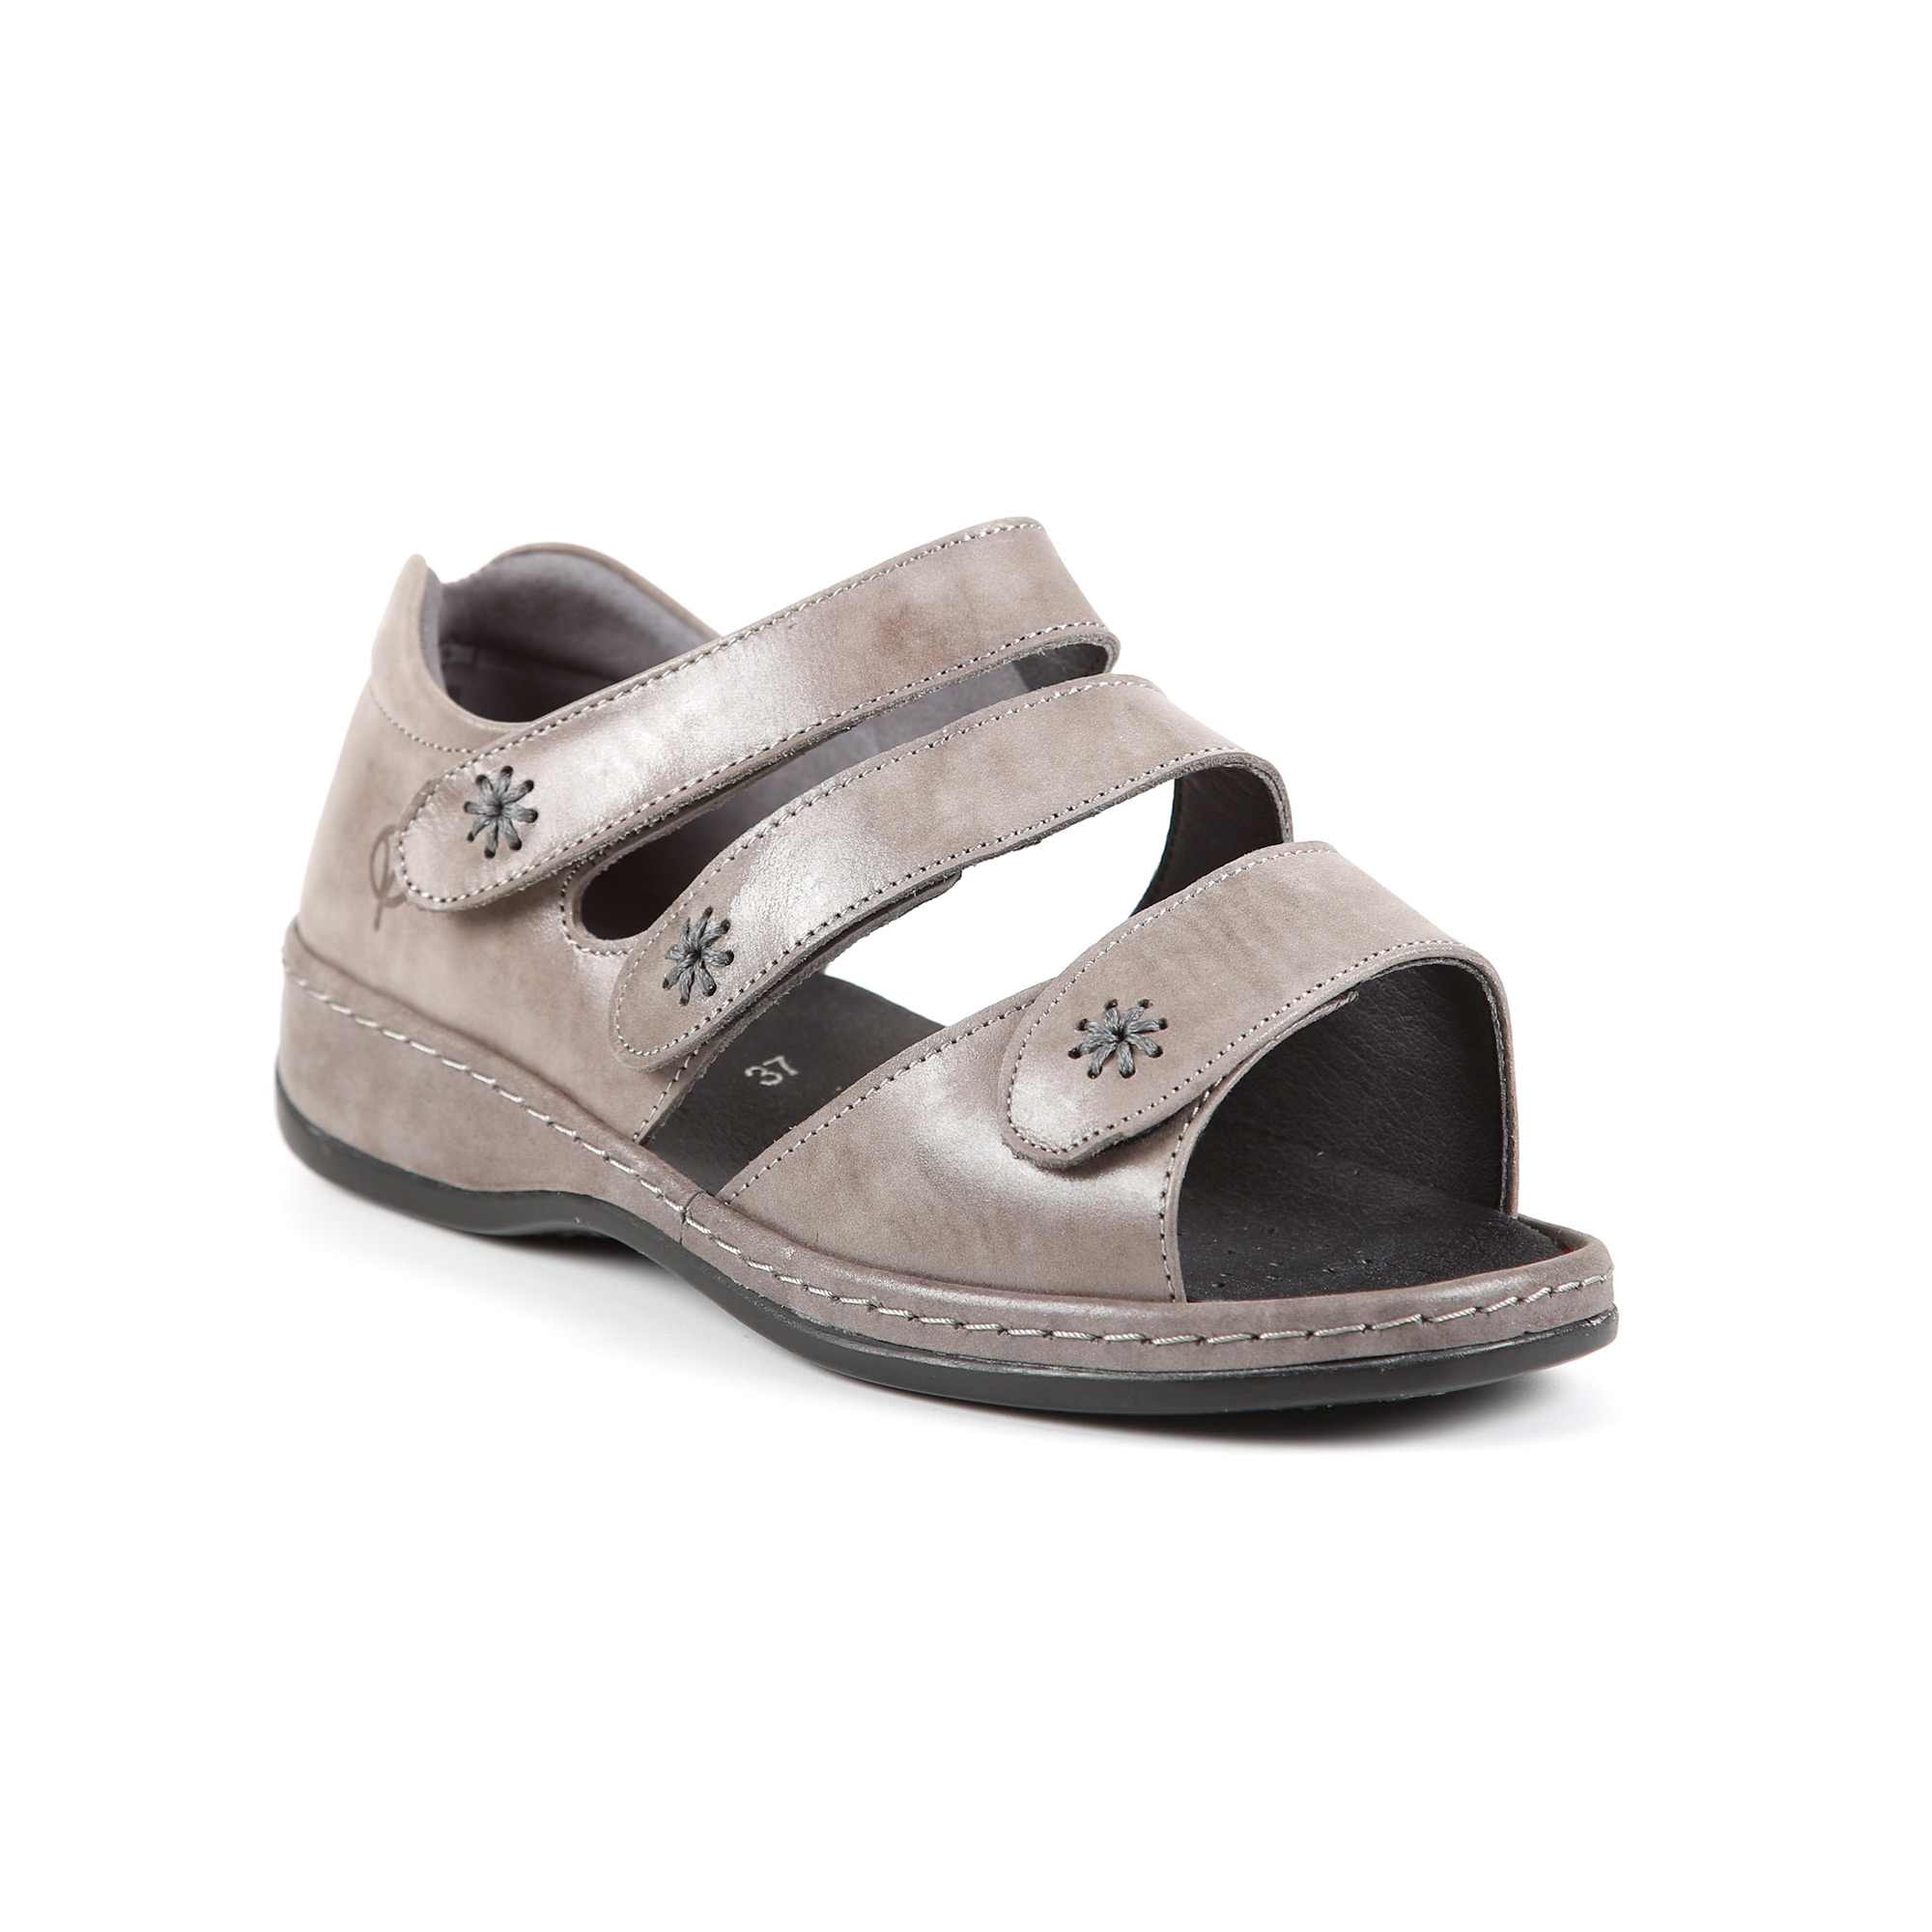 Cara Ladies Ultra Wide Sandal - Mobility House